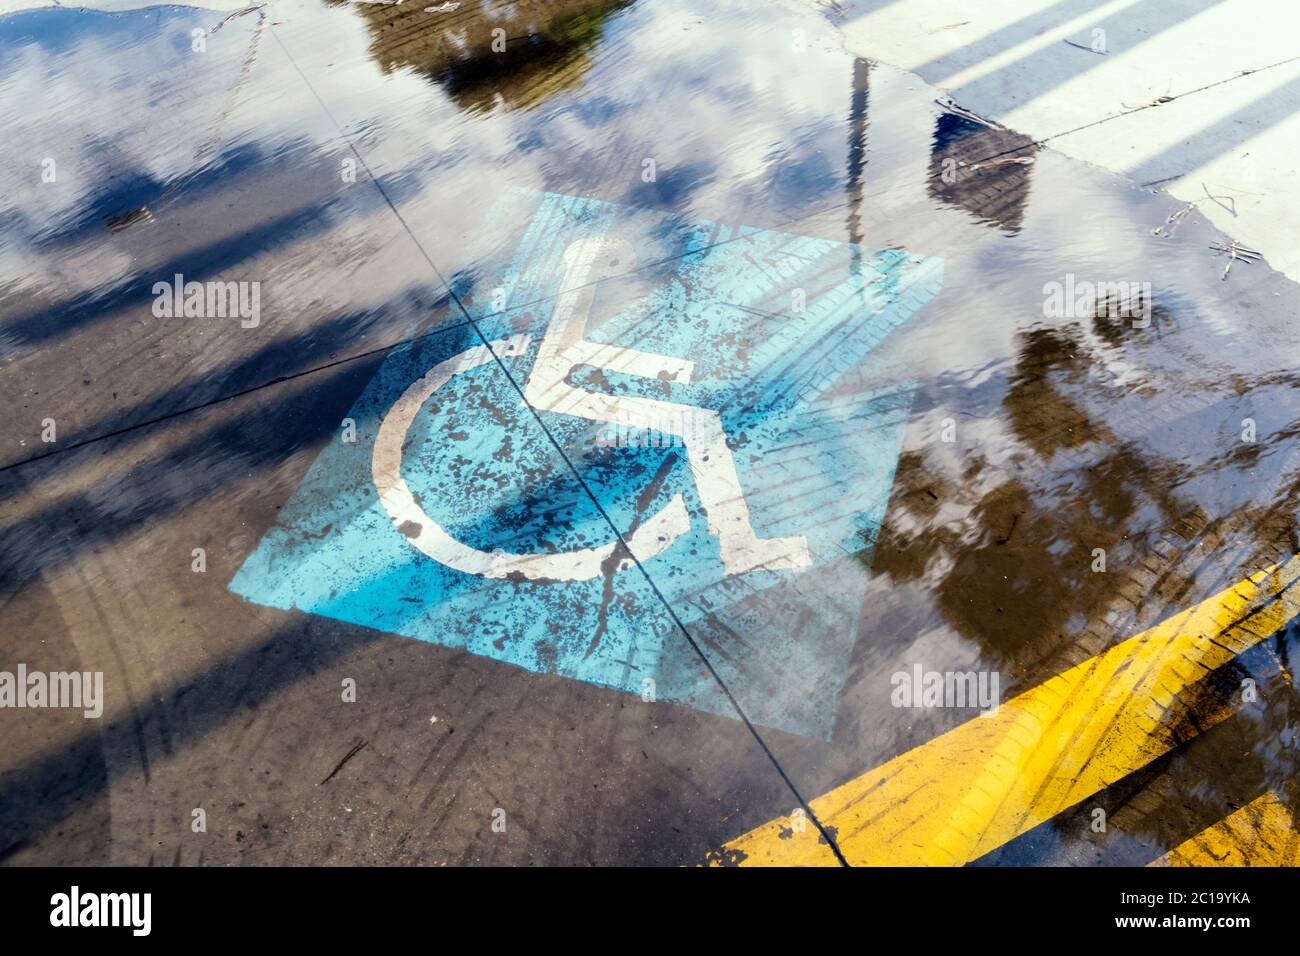 Flooded handicapped sign on the outdoor urban parking lot. Stock Photo